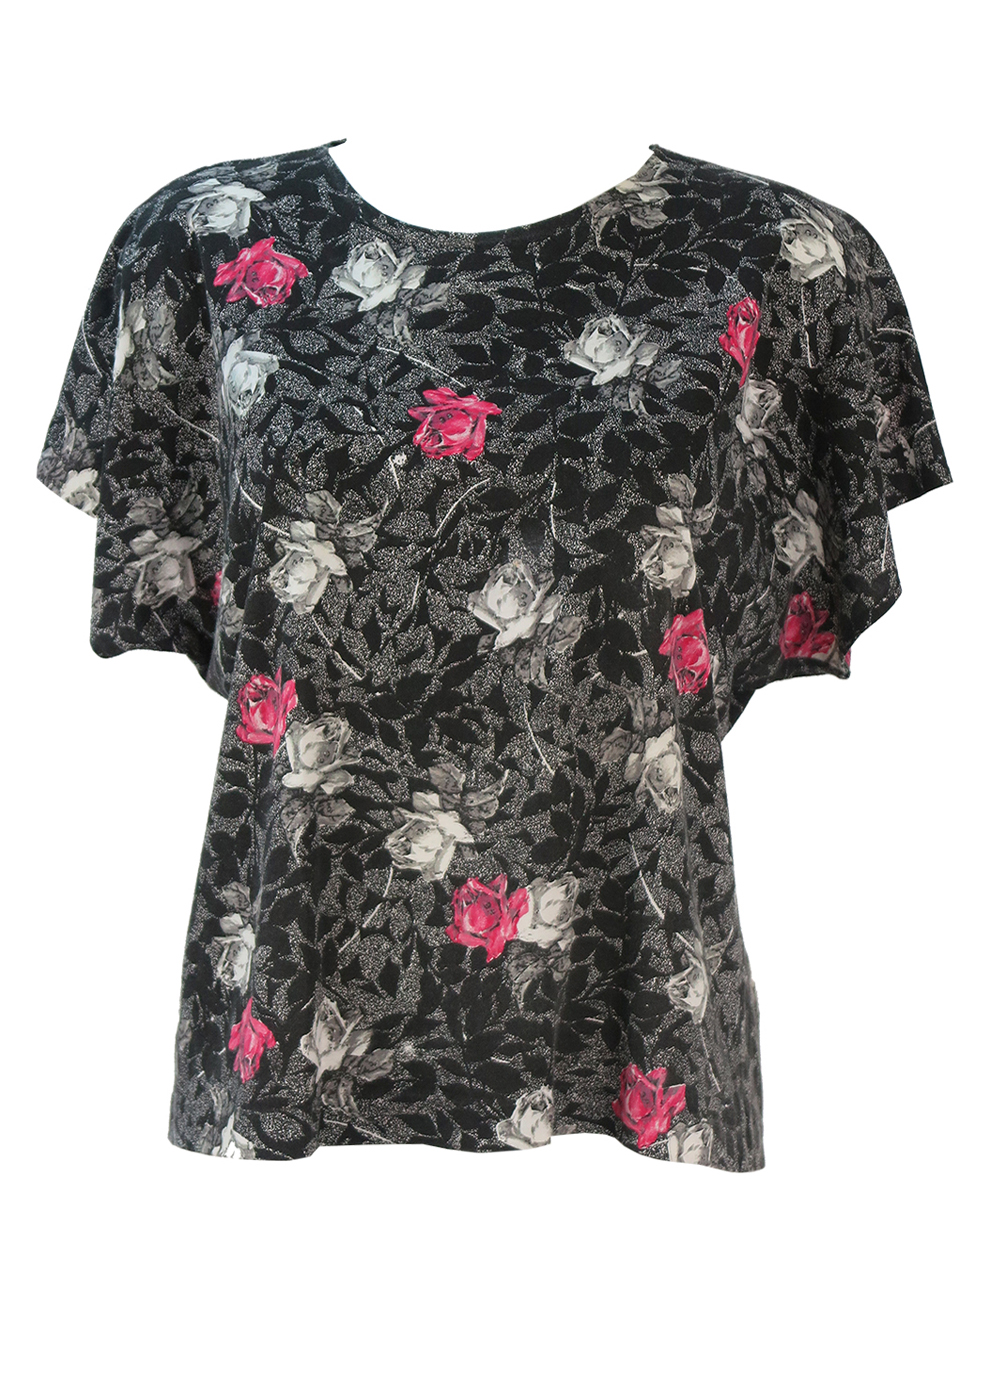 Black Short Sleeve Top with Pink, White & Grey Floral Pattern - M/L ...